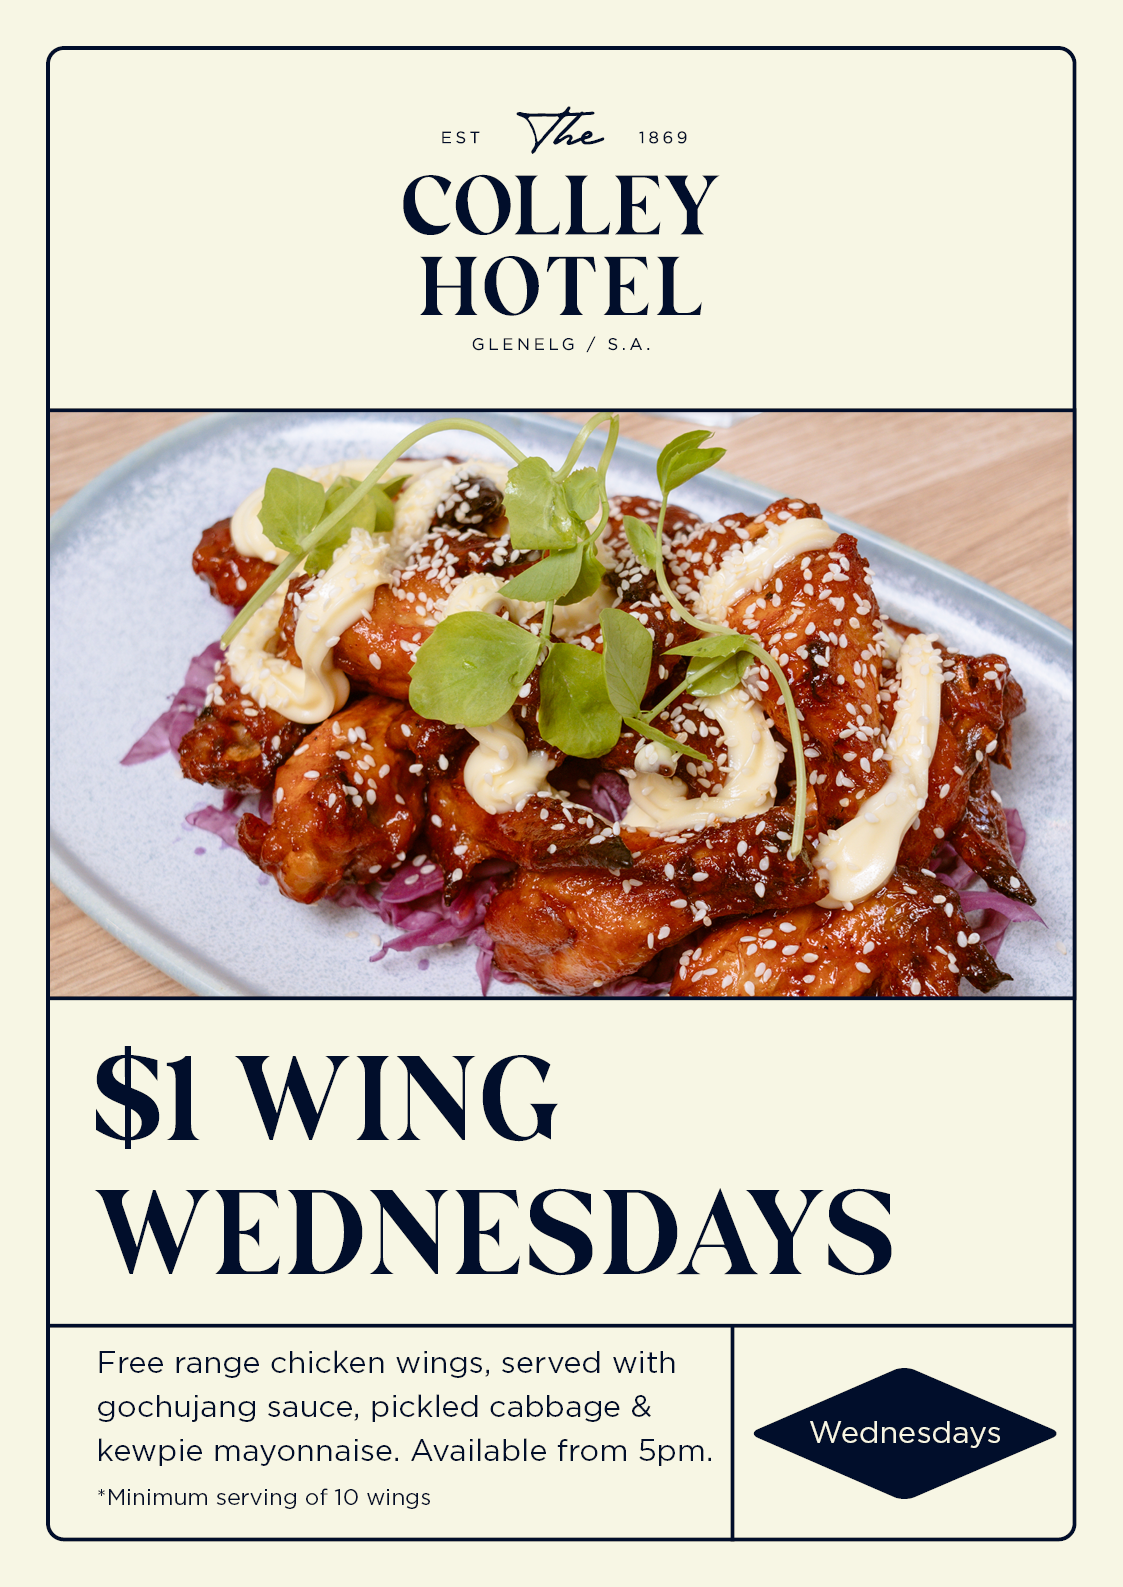 Wednesday Wings night at the colley hotel